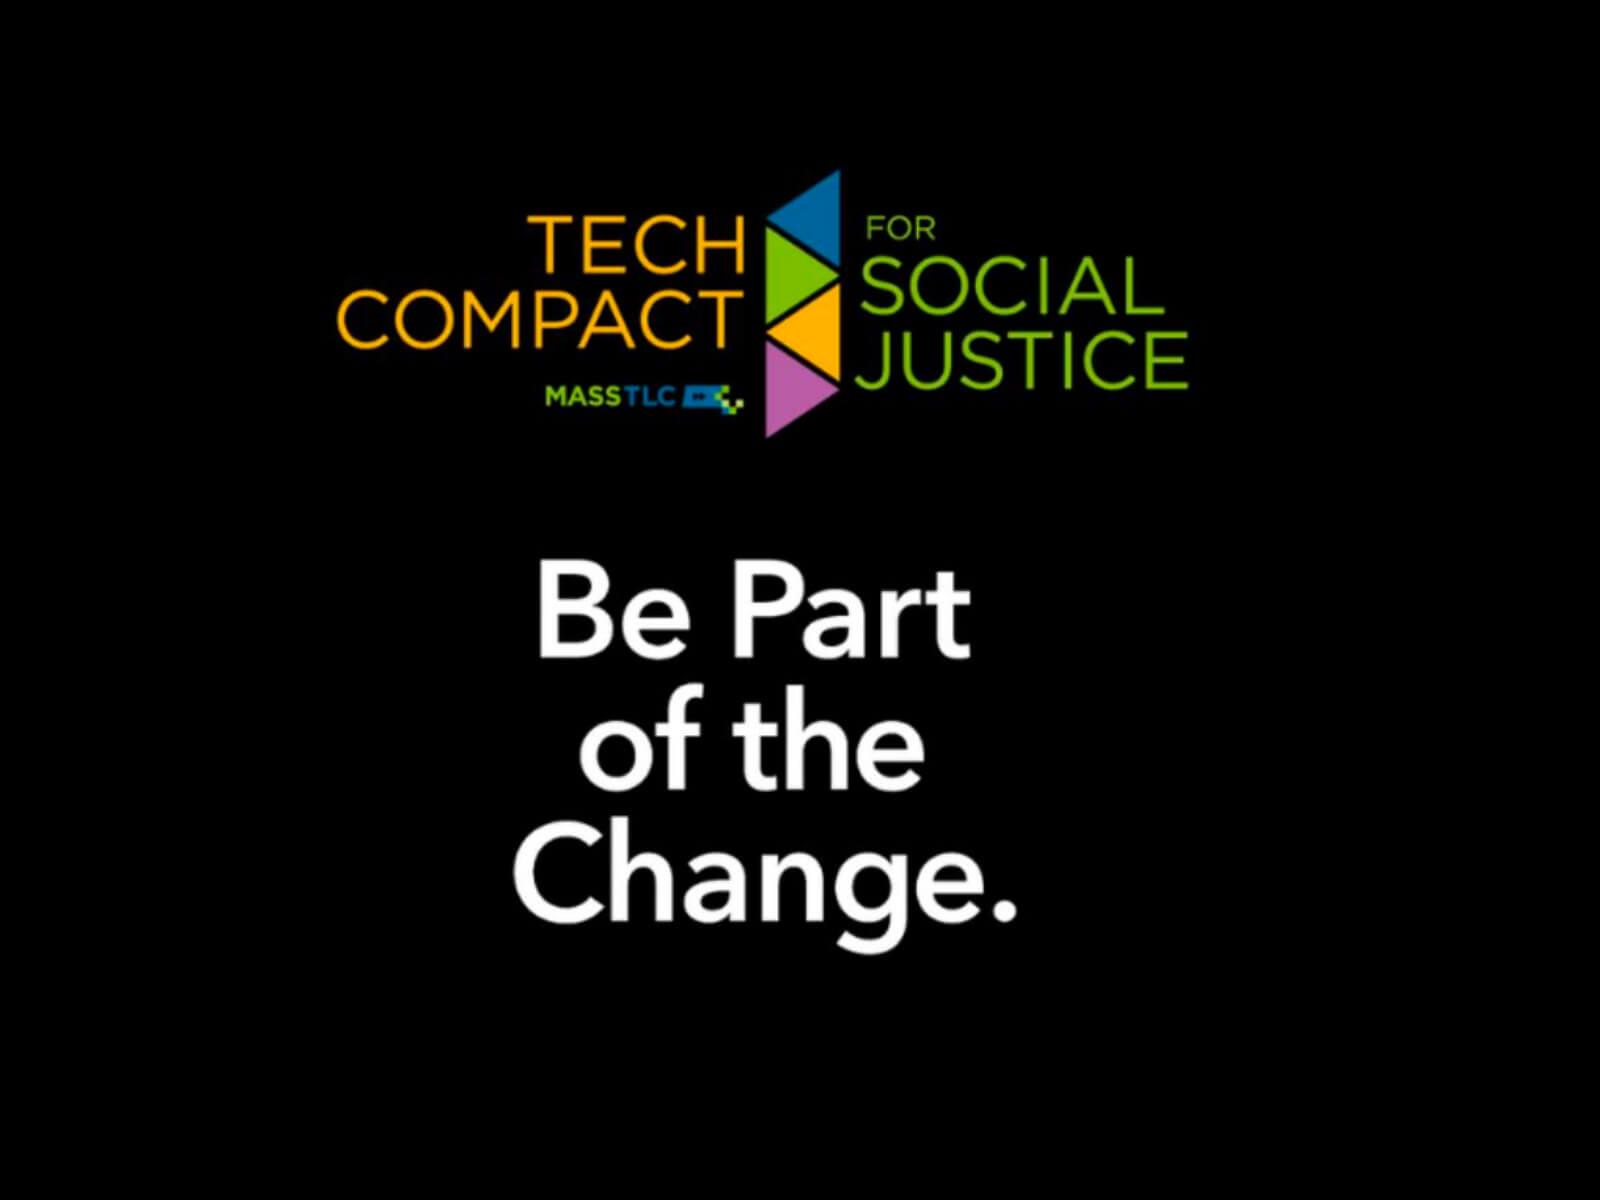 Vecna - Tech Compact, Social Justice - Be part of the change